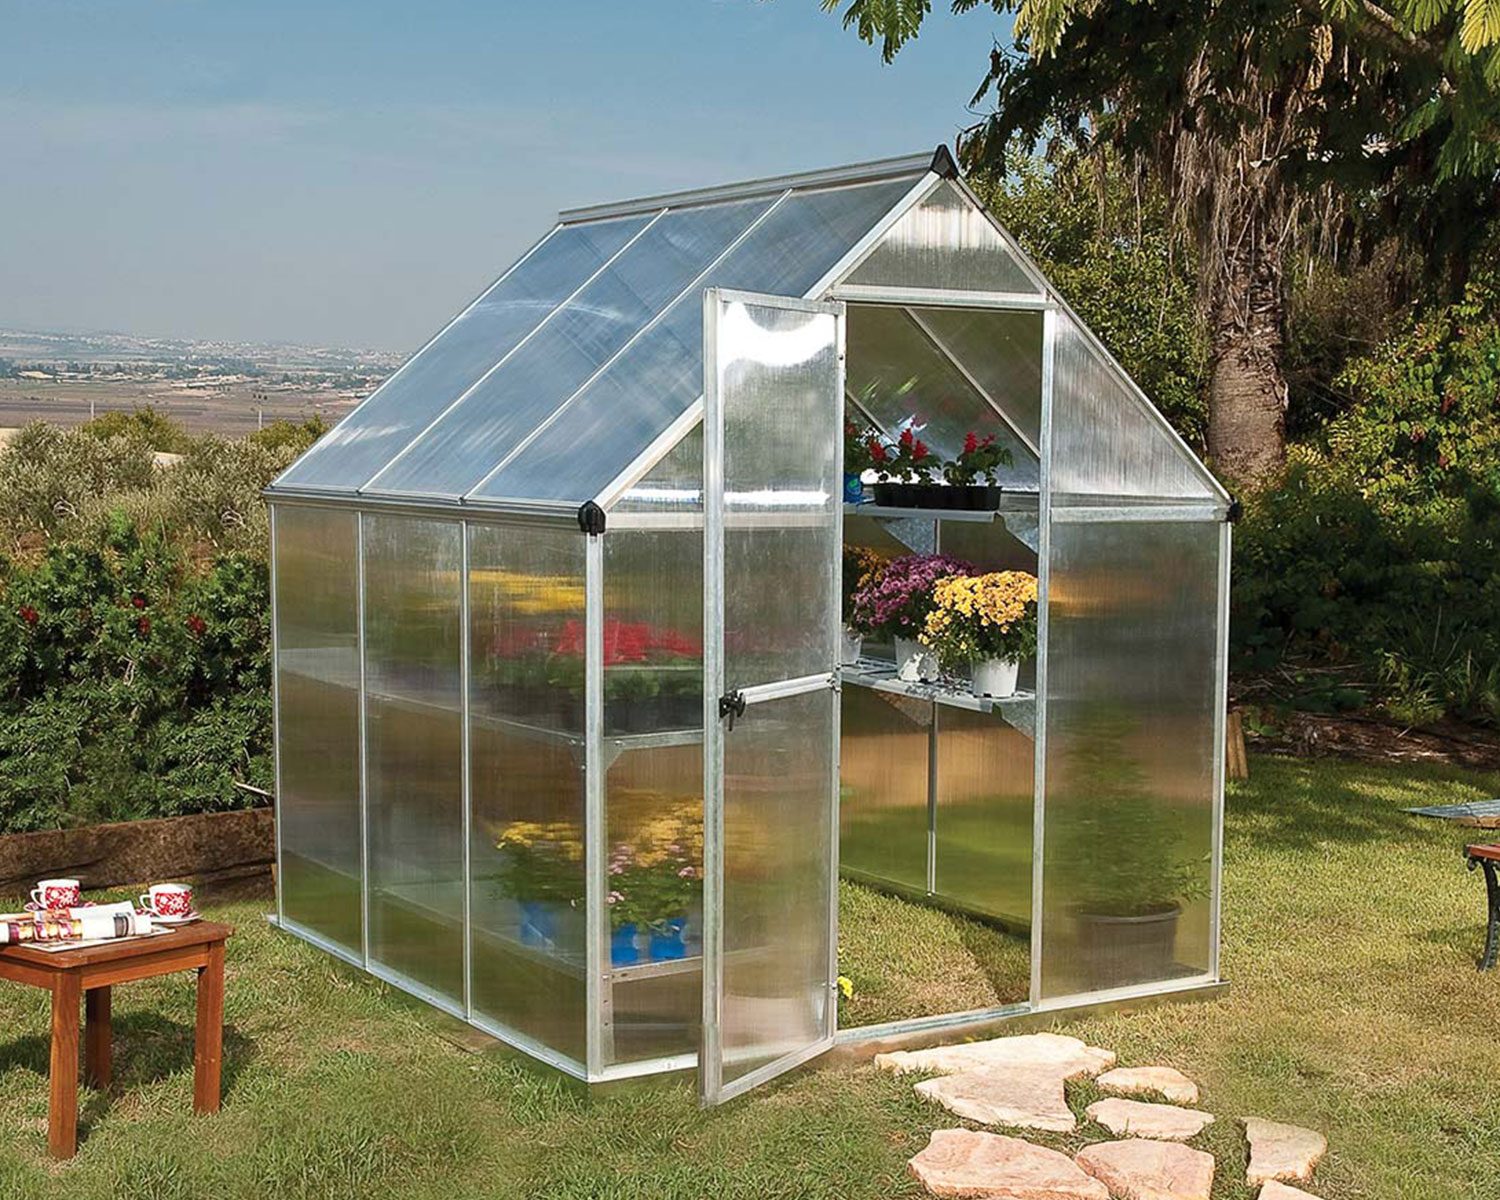 Greenhouse Mythos 6' x 6' Silver Structure & Twinwall Panels outside on a lawn